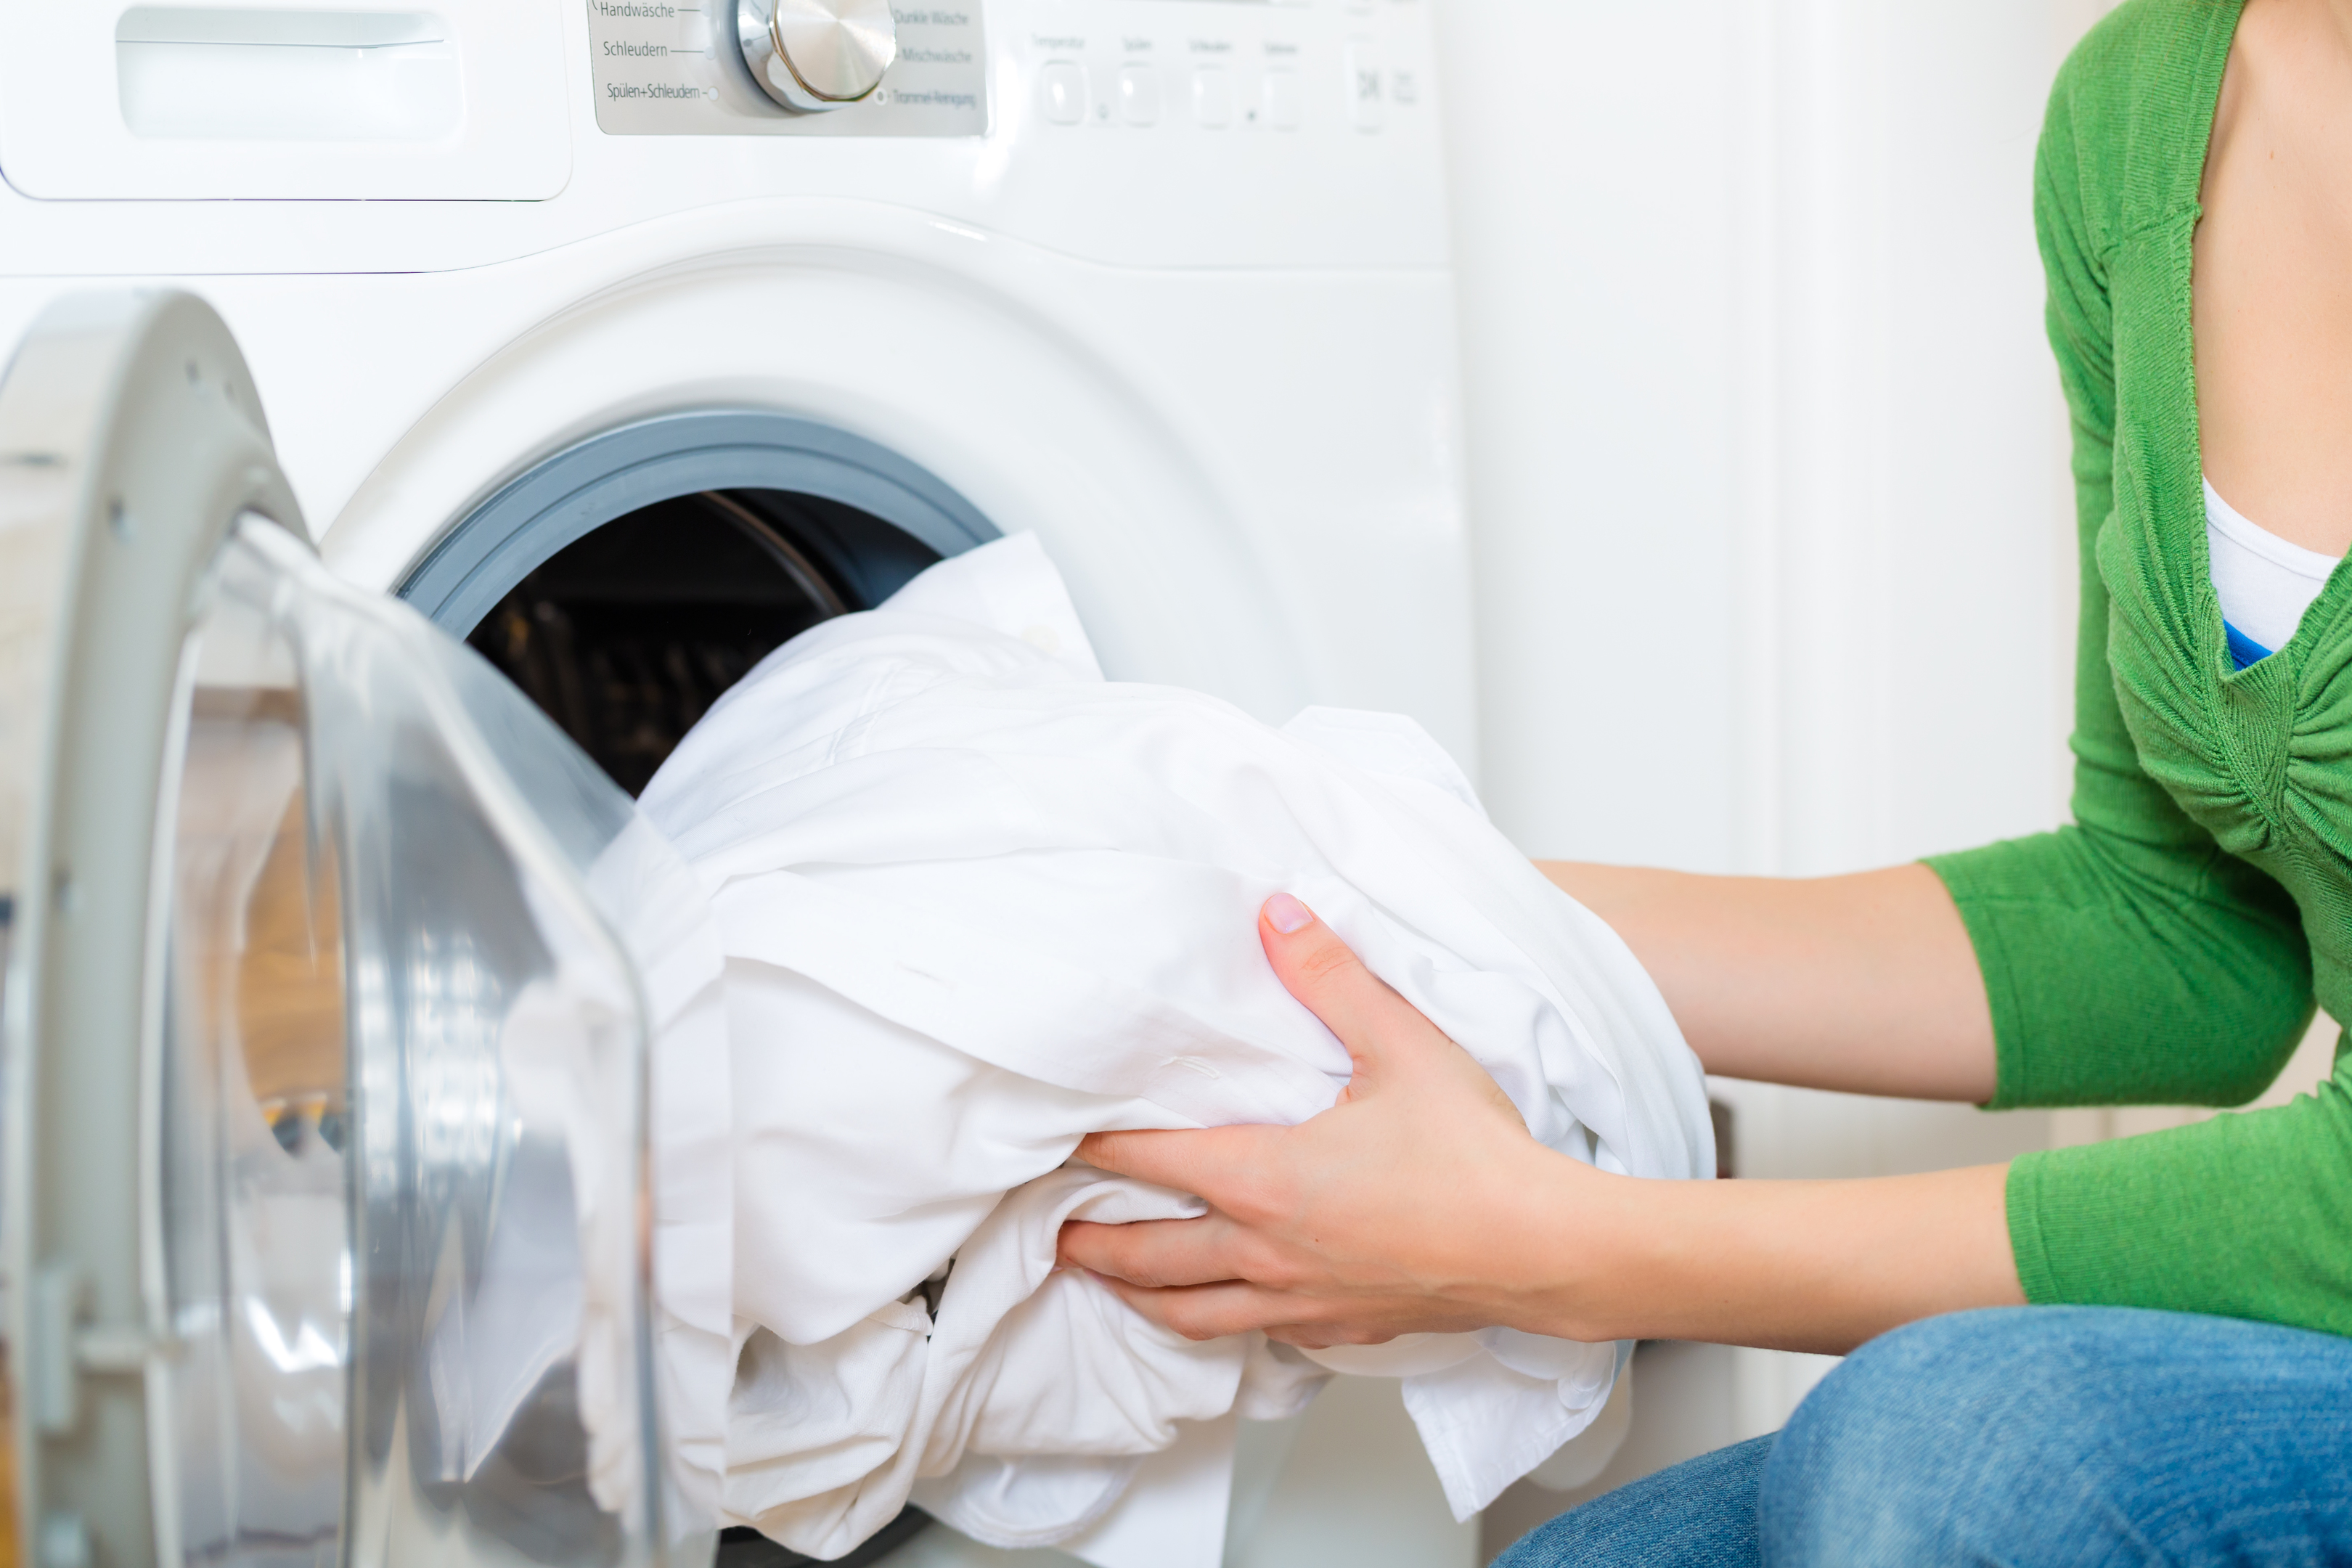 The report follows the watchdog threatening Peterborough Trading Standards with legal action for failing to force white goods manufacturer Whirlpool to change its advice to consumers, despite hundreds of its brands' tumble dryers catching fire (iStock)